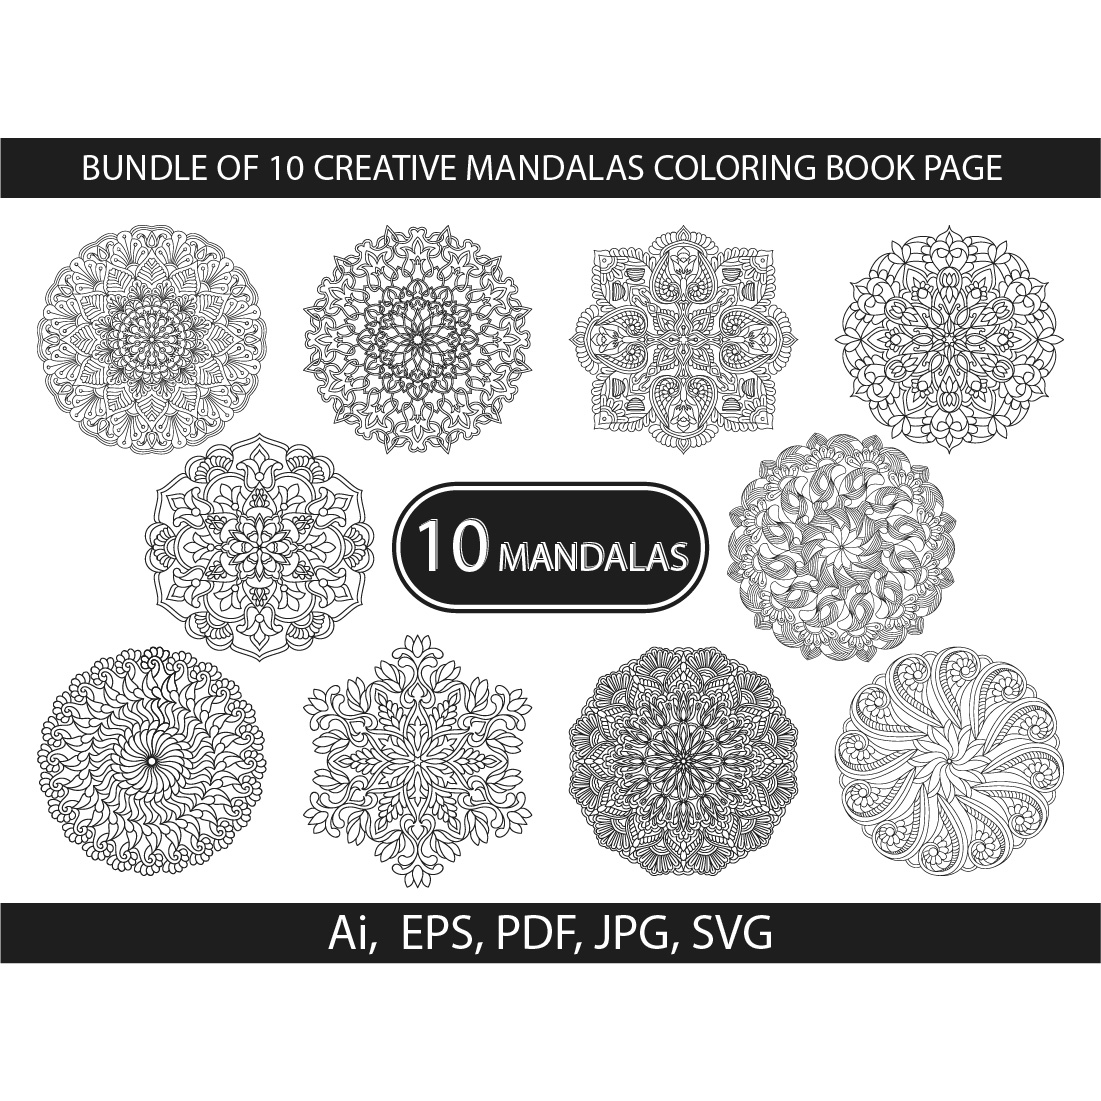 Bundle of 10 Creative Mandalas Coloring Book Pages cover image.